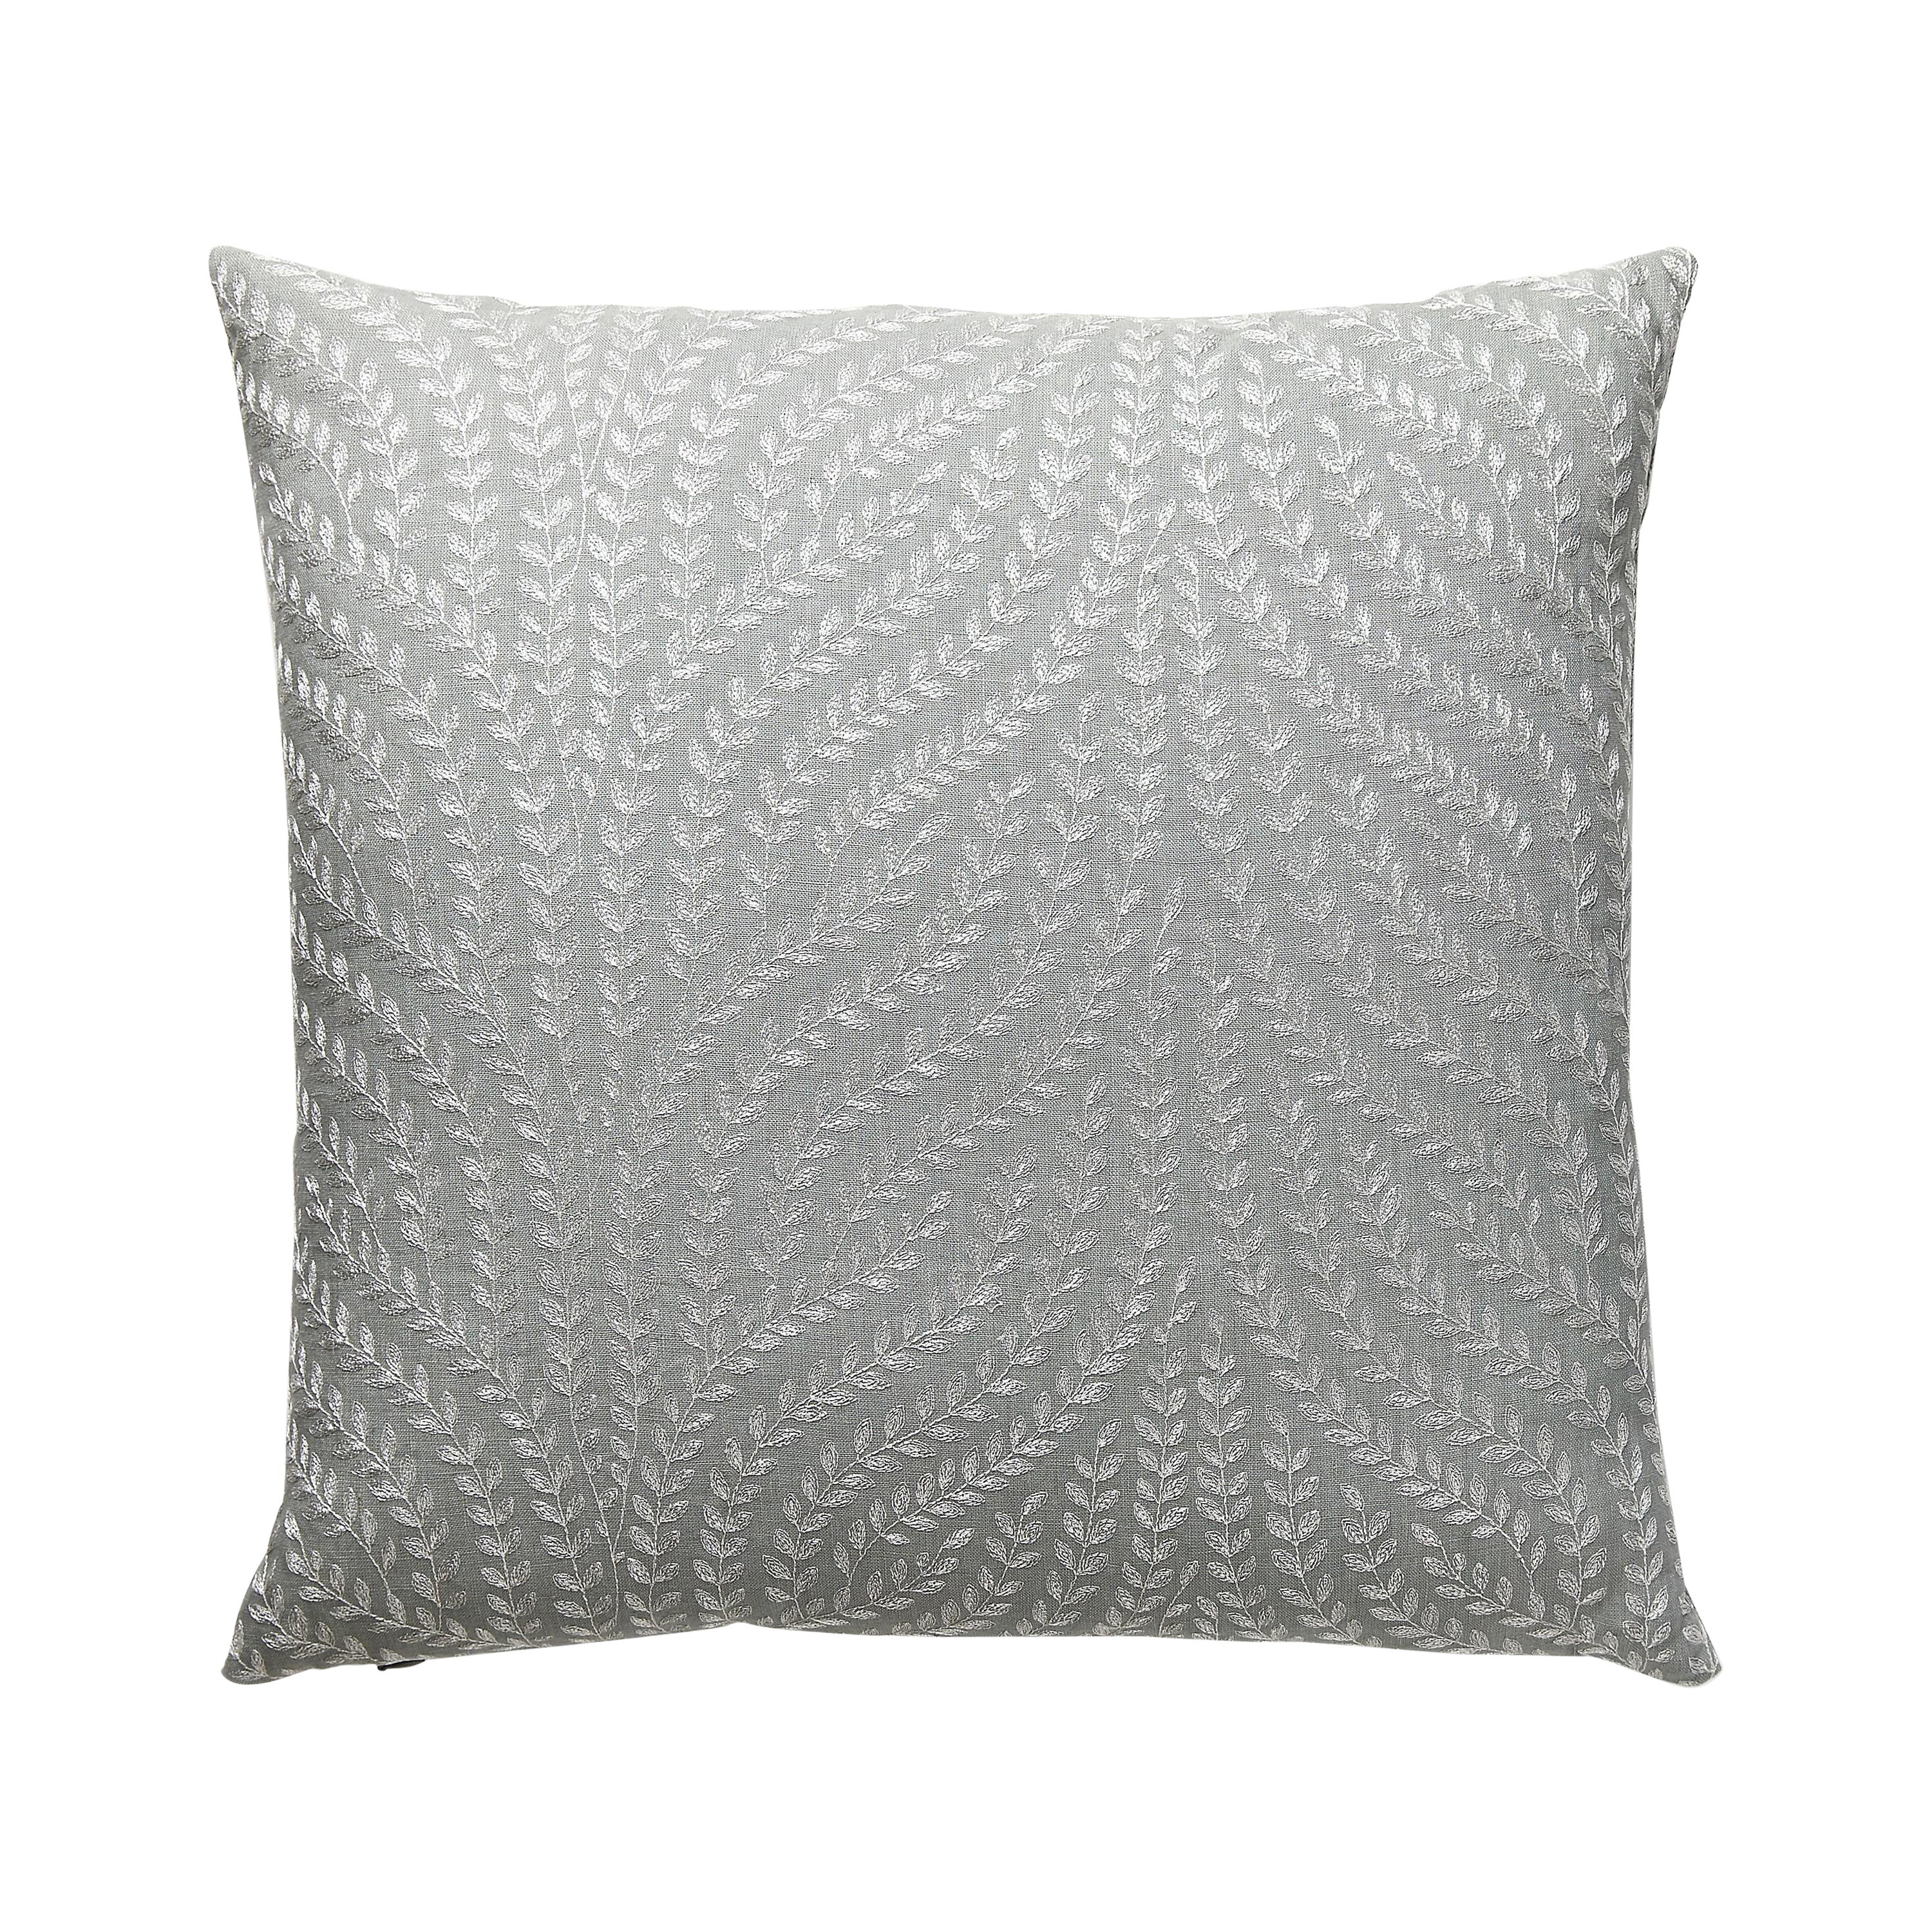 Willow Vine Embroidery Pillow For Sale